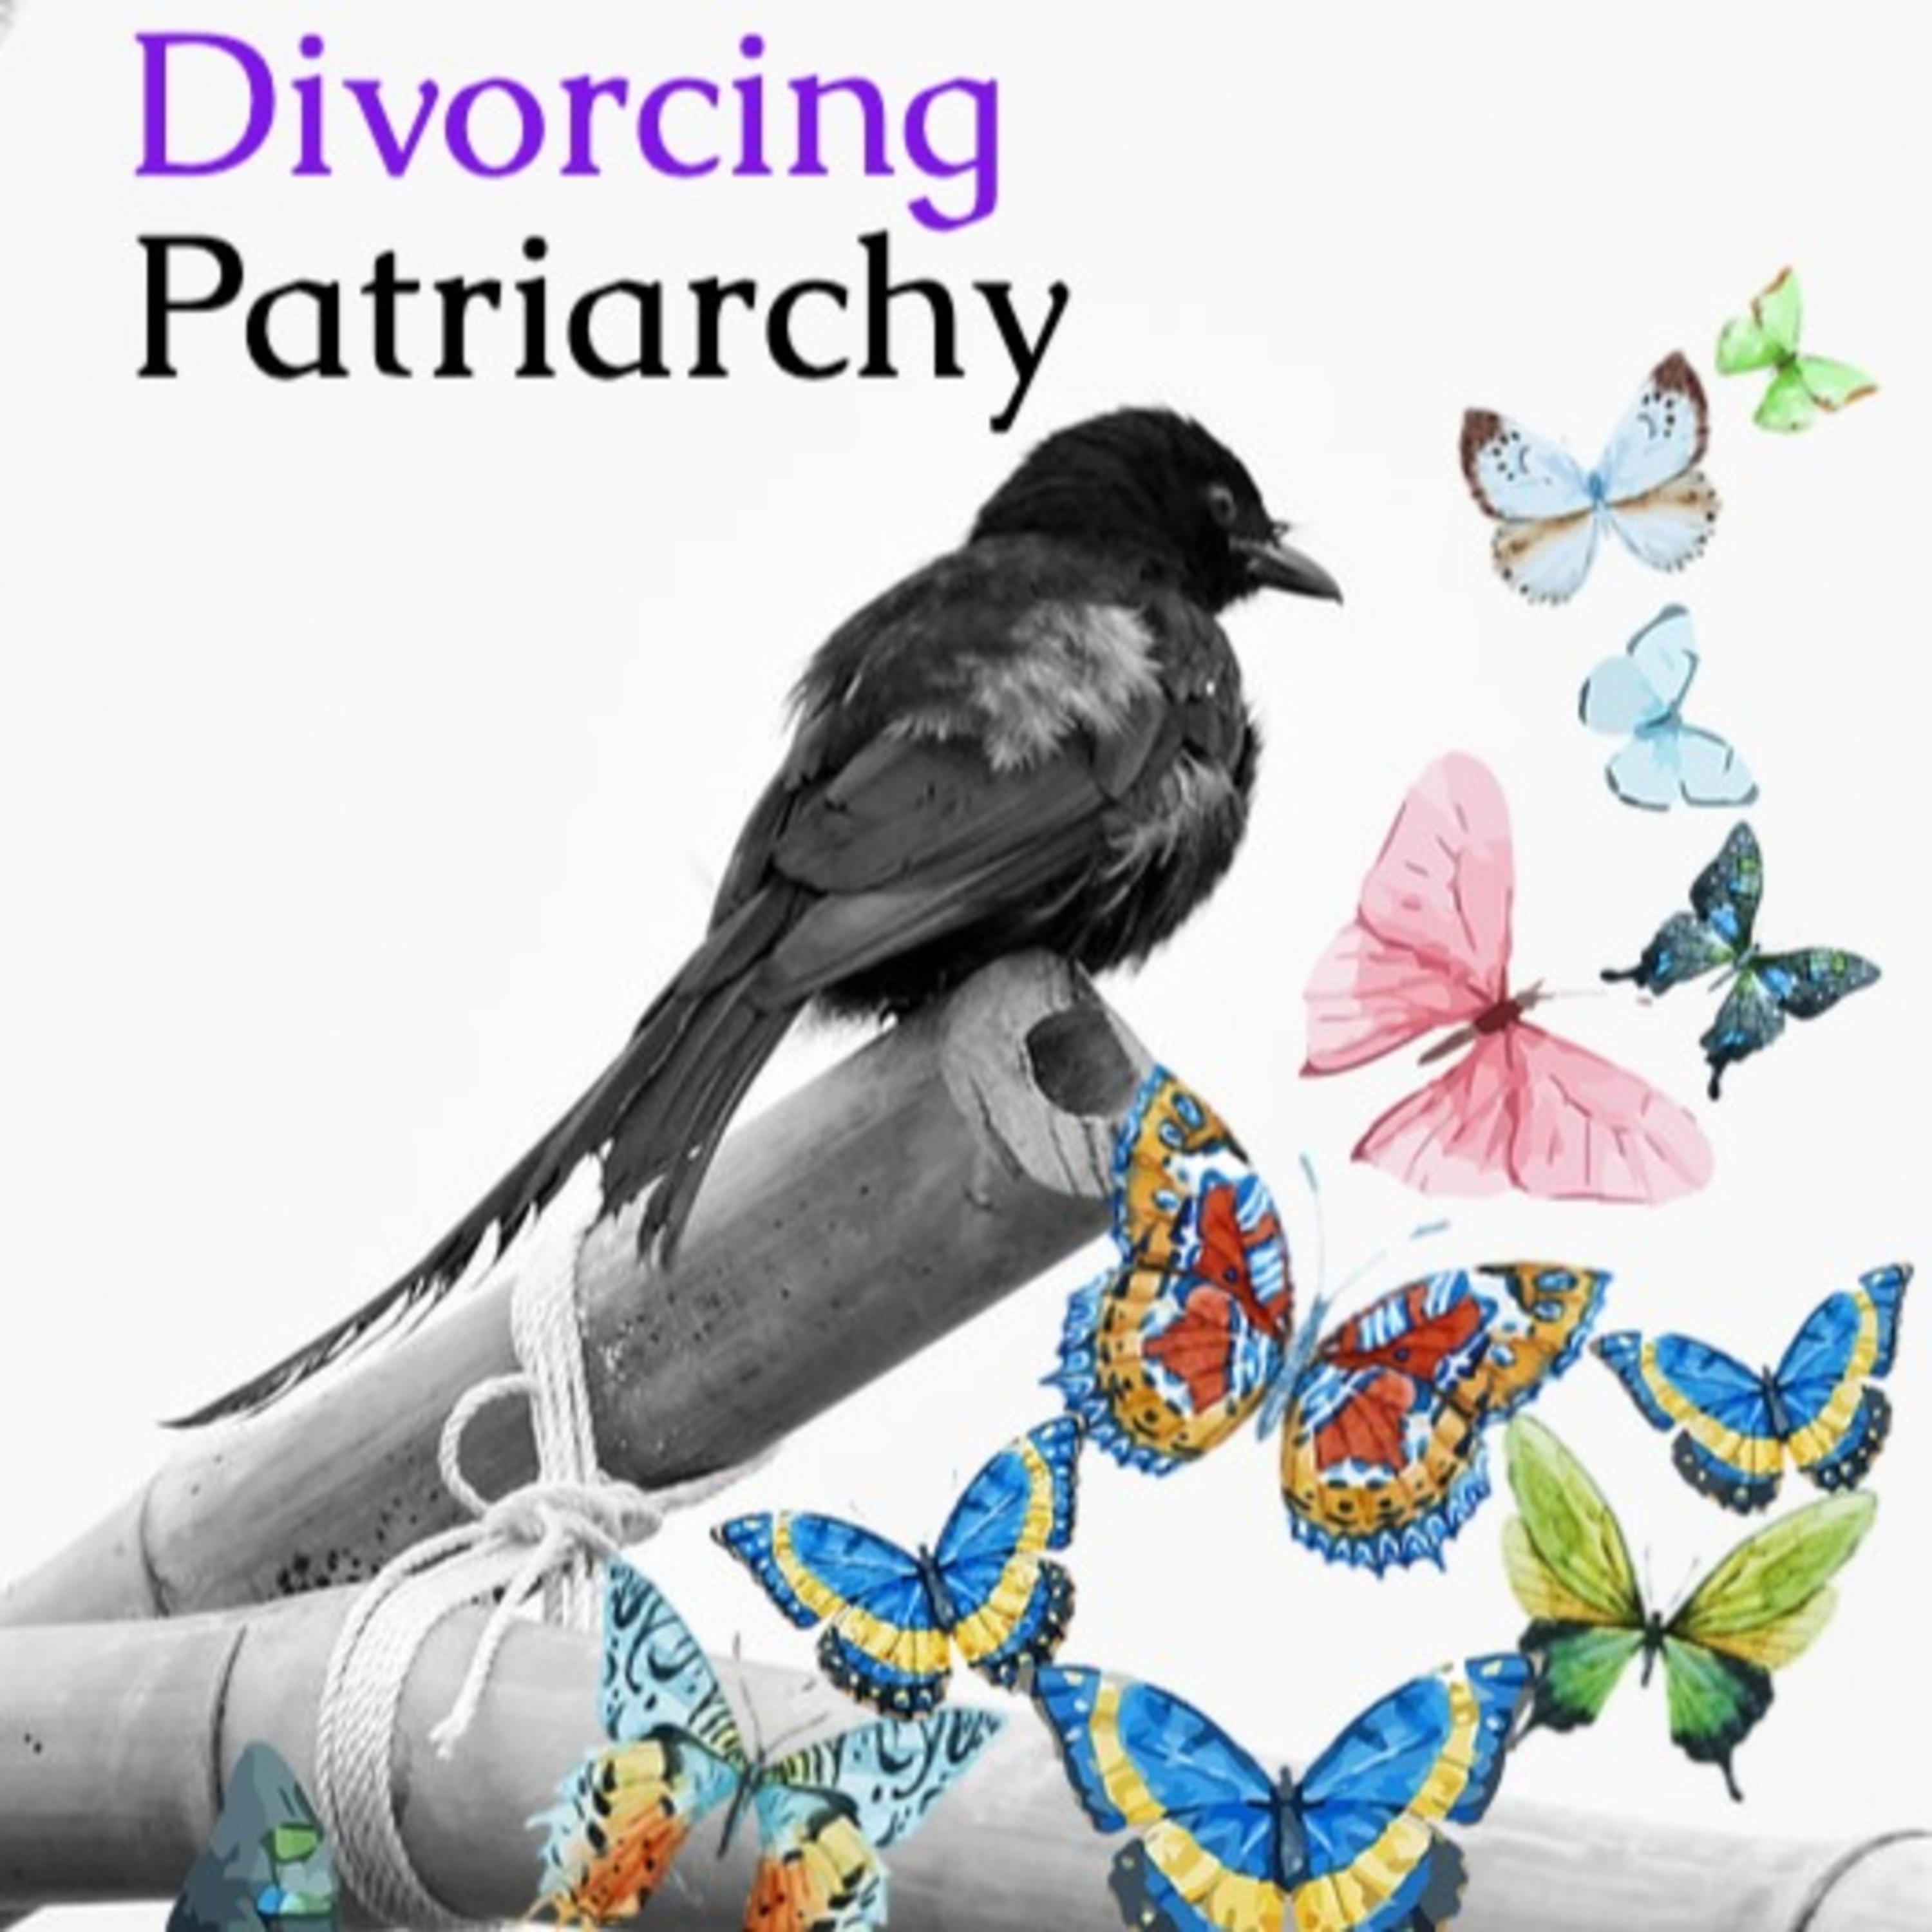 Defining Patriarchy and the 4-Step Journey to Divorce It